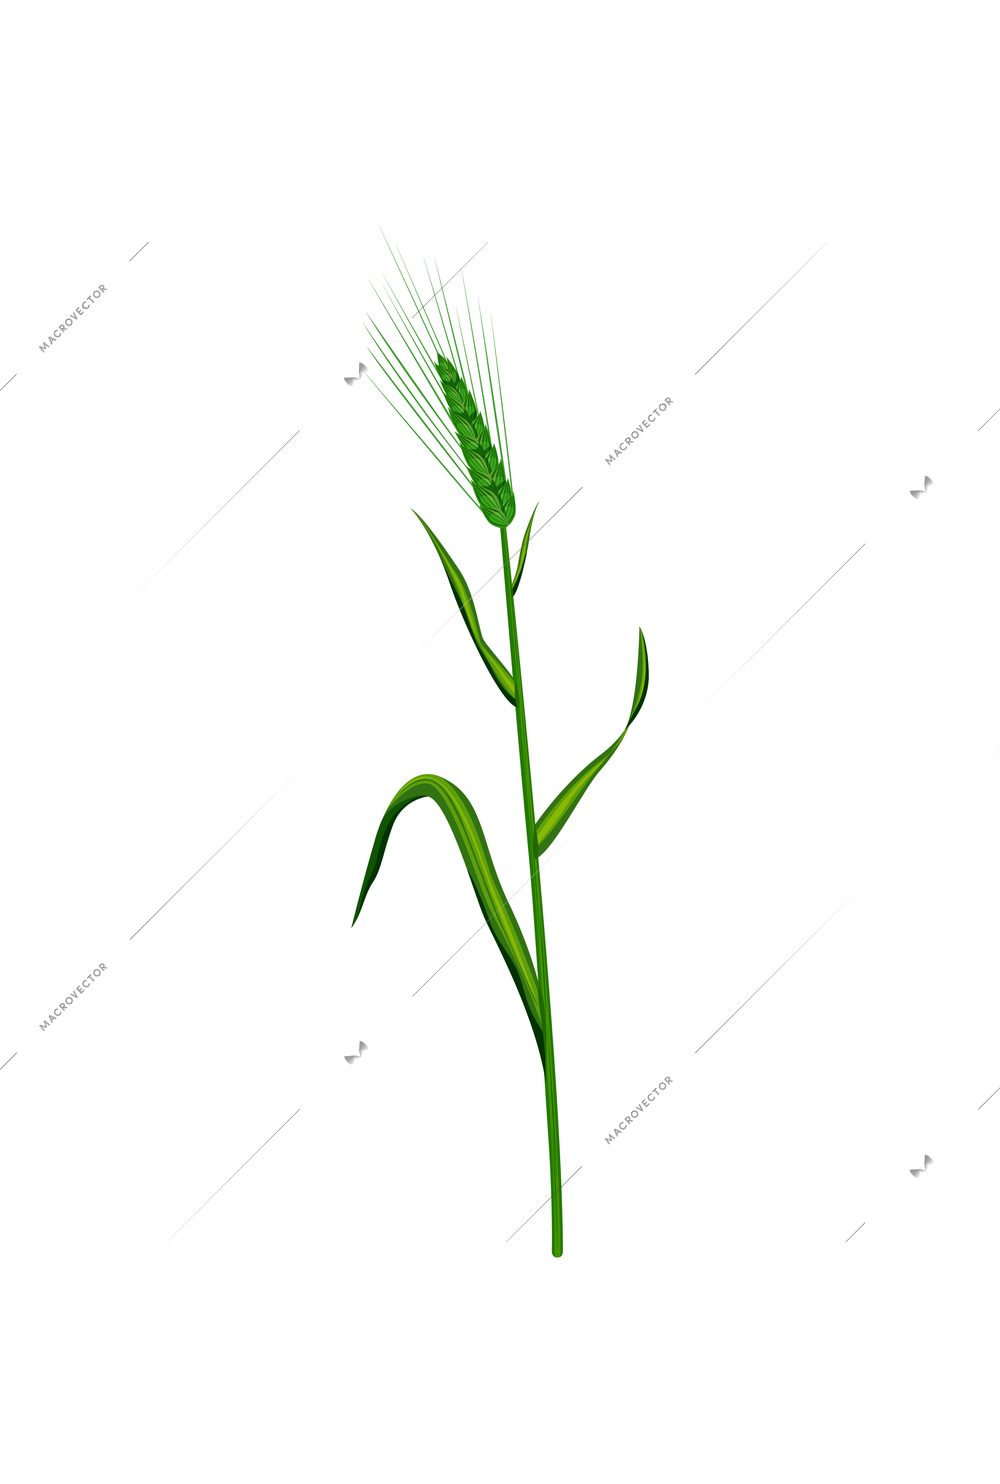 Realistic icon of green barley ear with leaves vector illustration